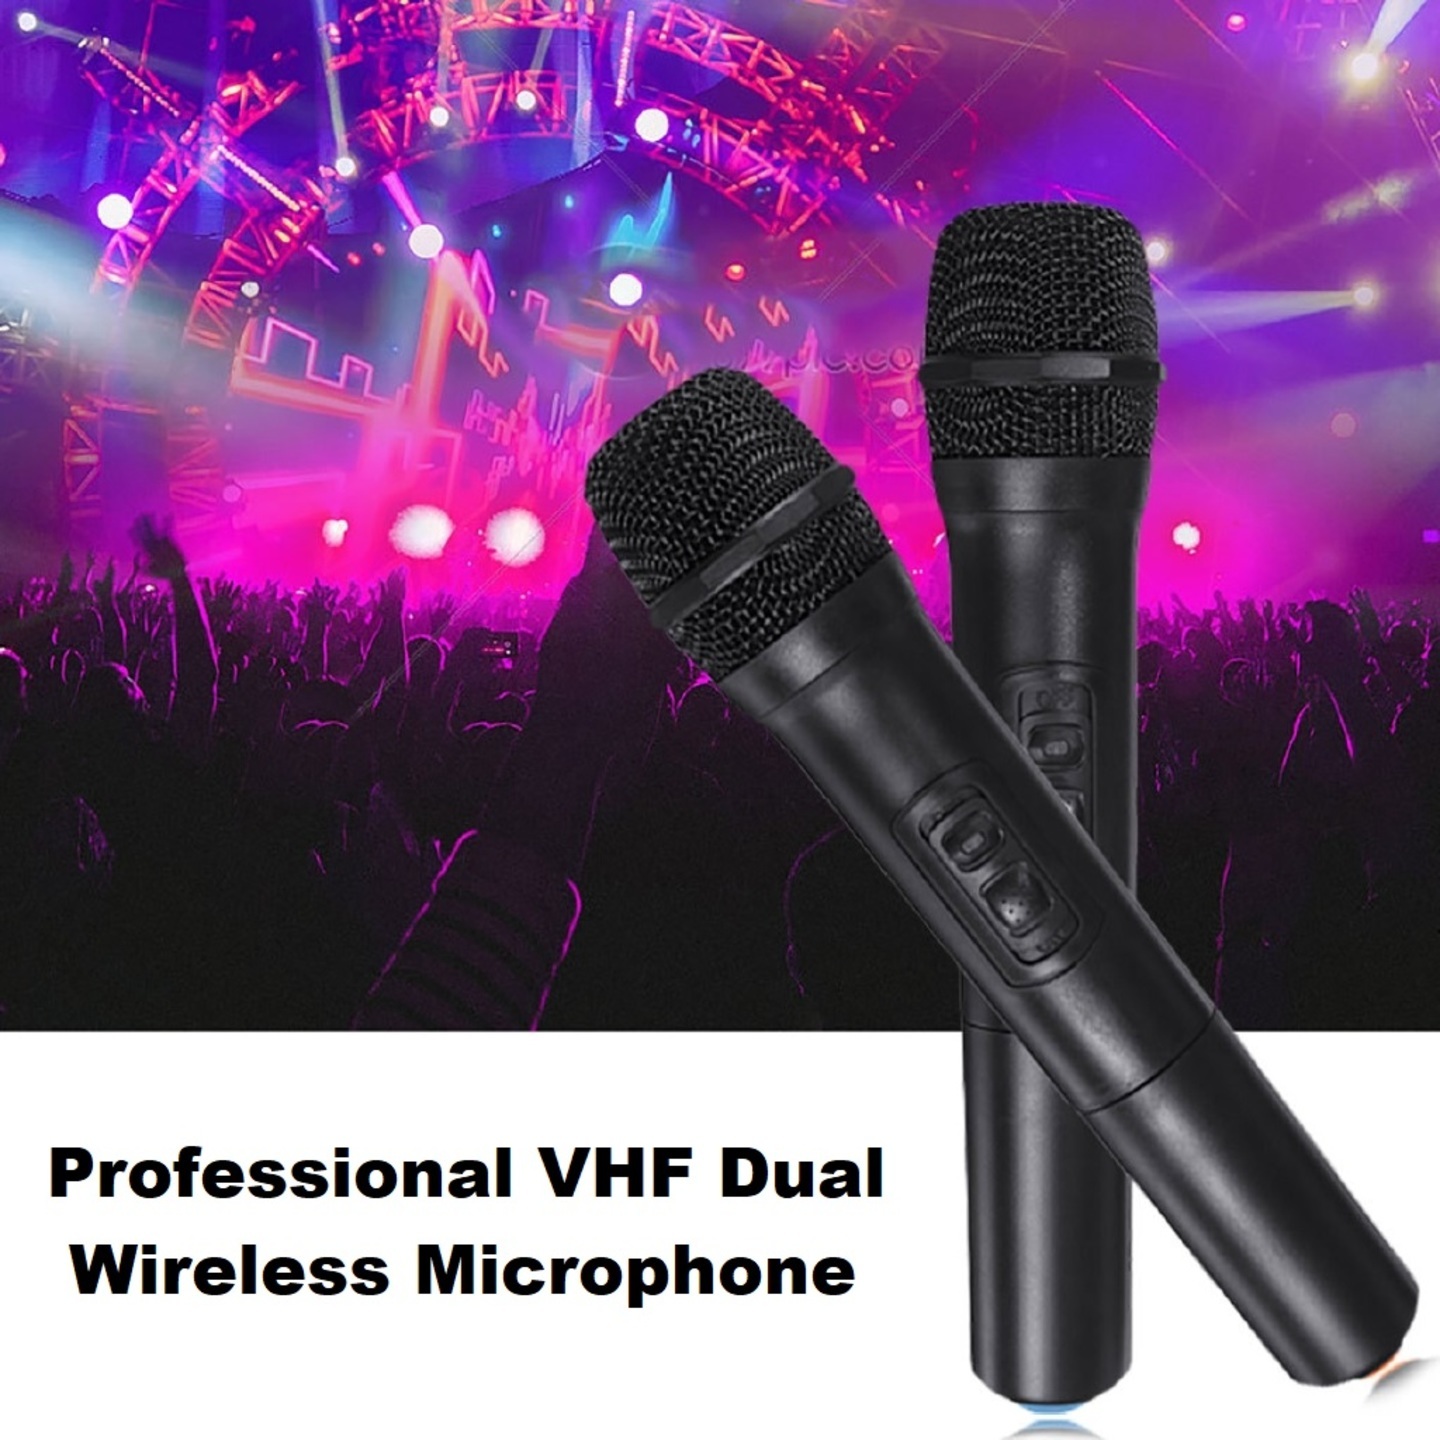 Rental: Professional VHF Dual Wireless Microphone with Receiver